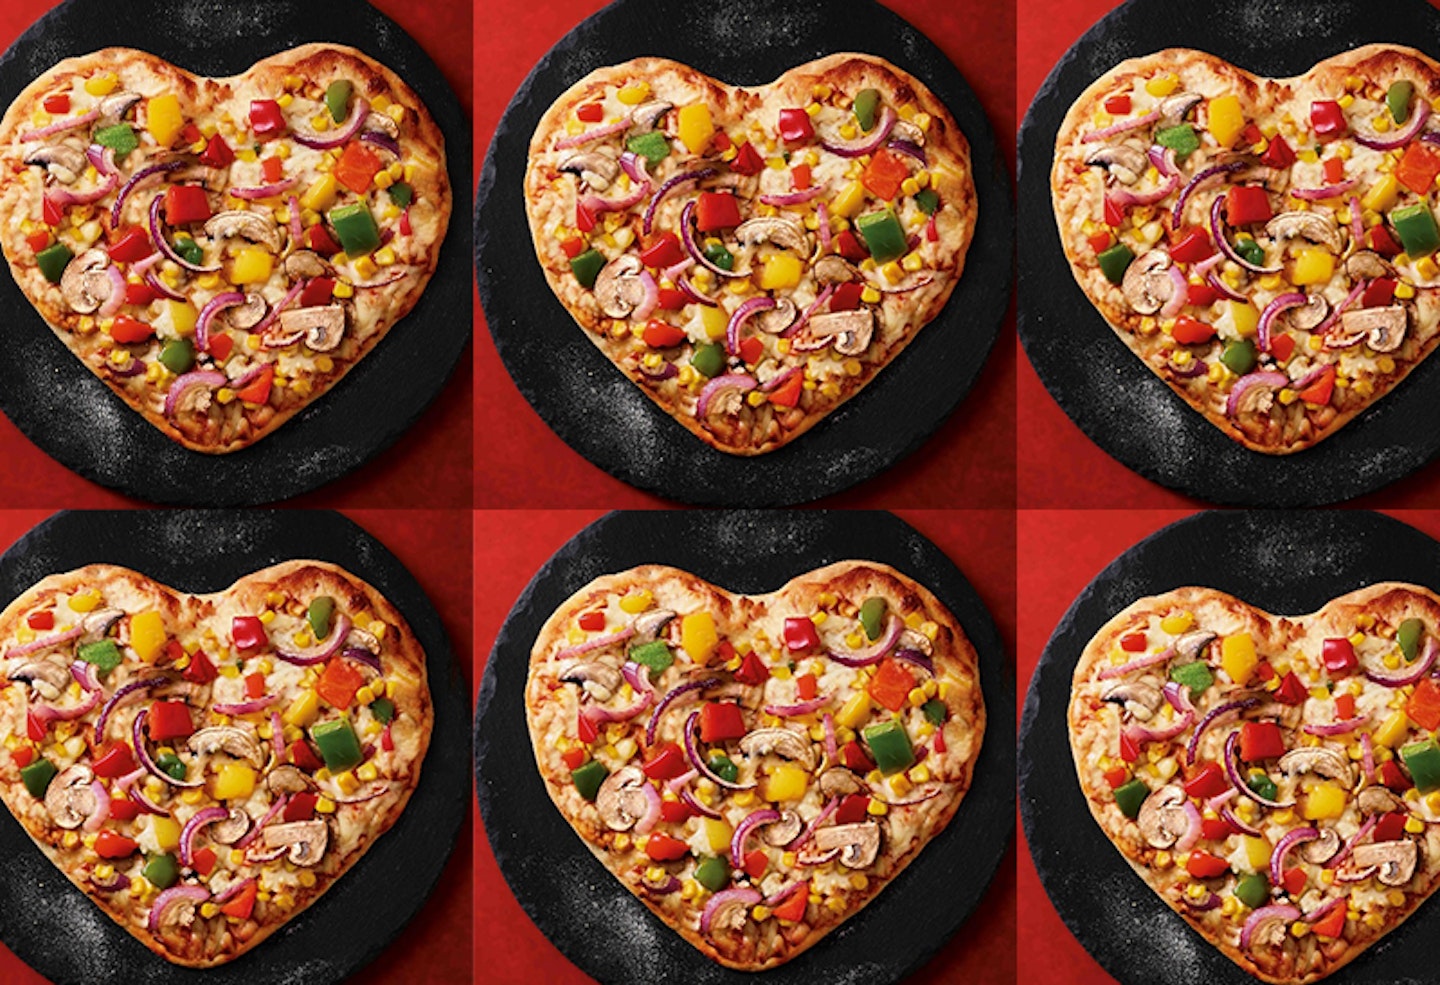 Asda launches a HEART shaped PIZZA for Valentine’s Day!